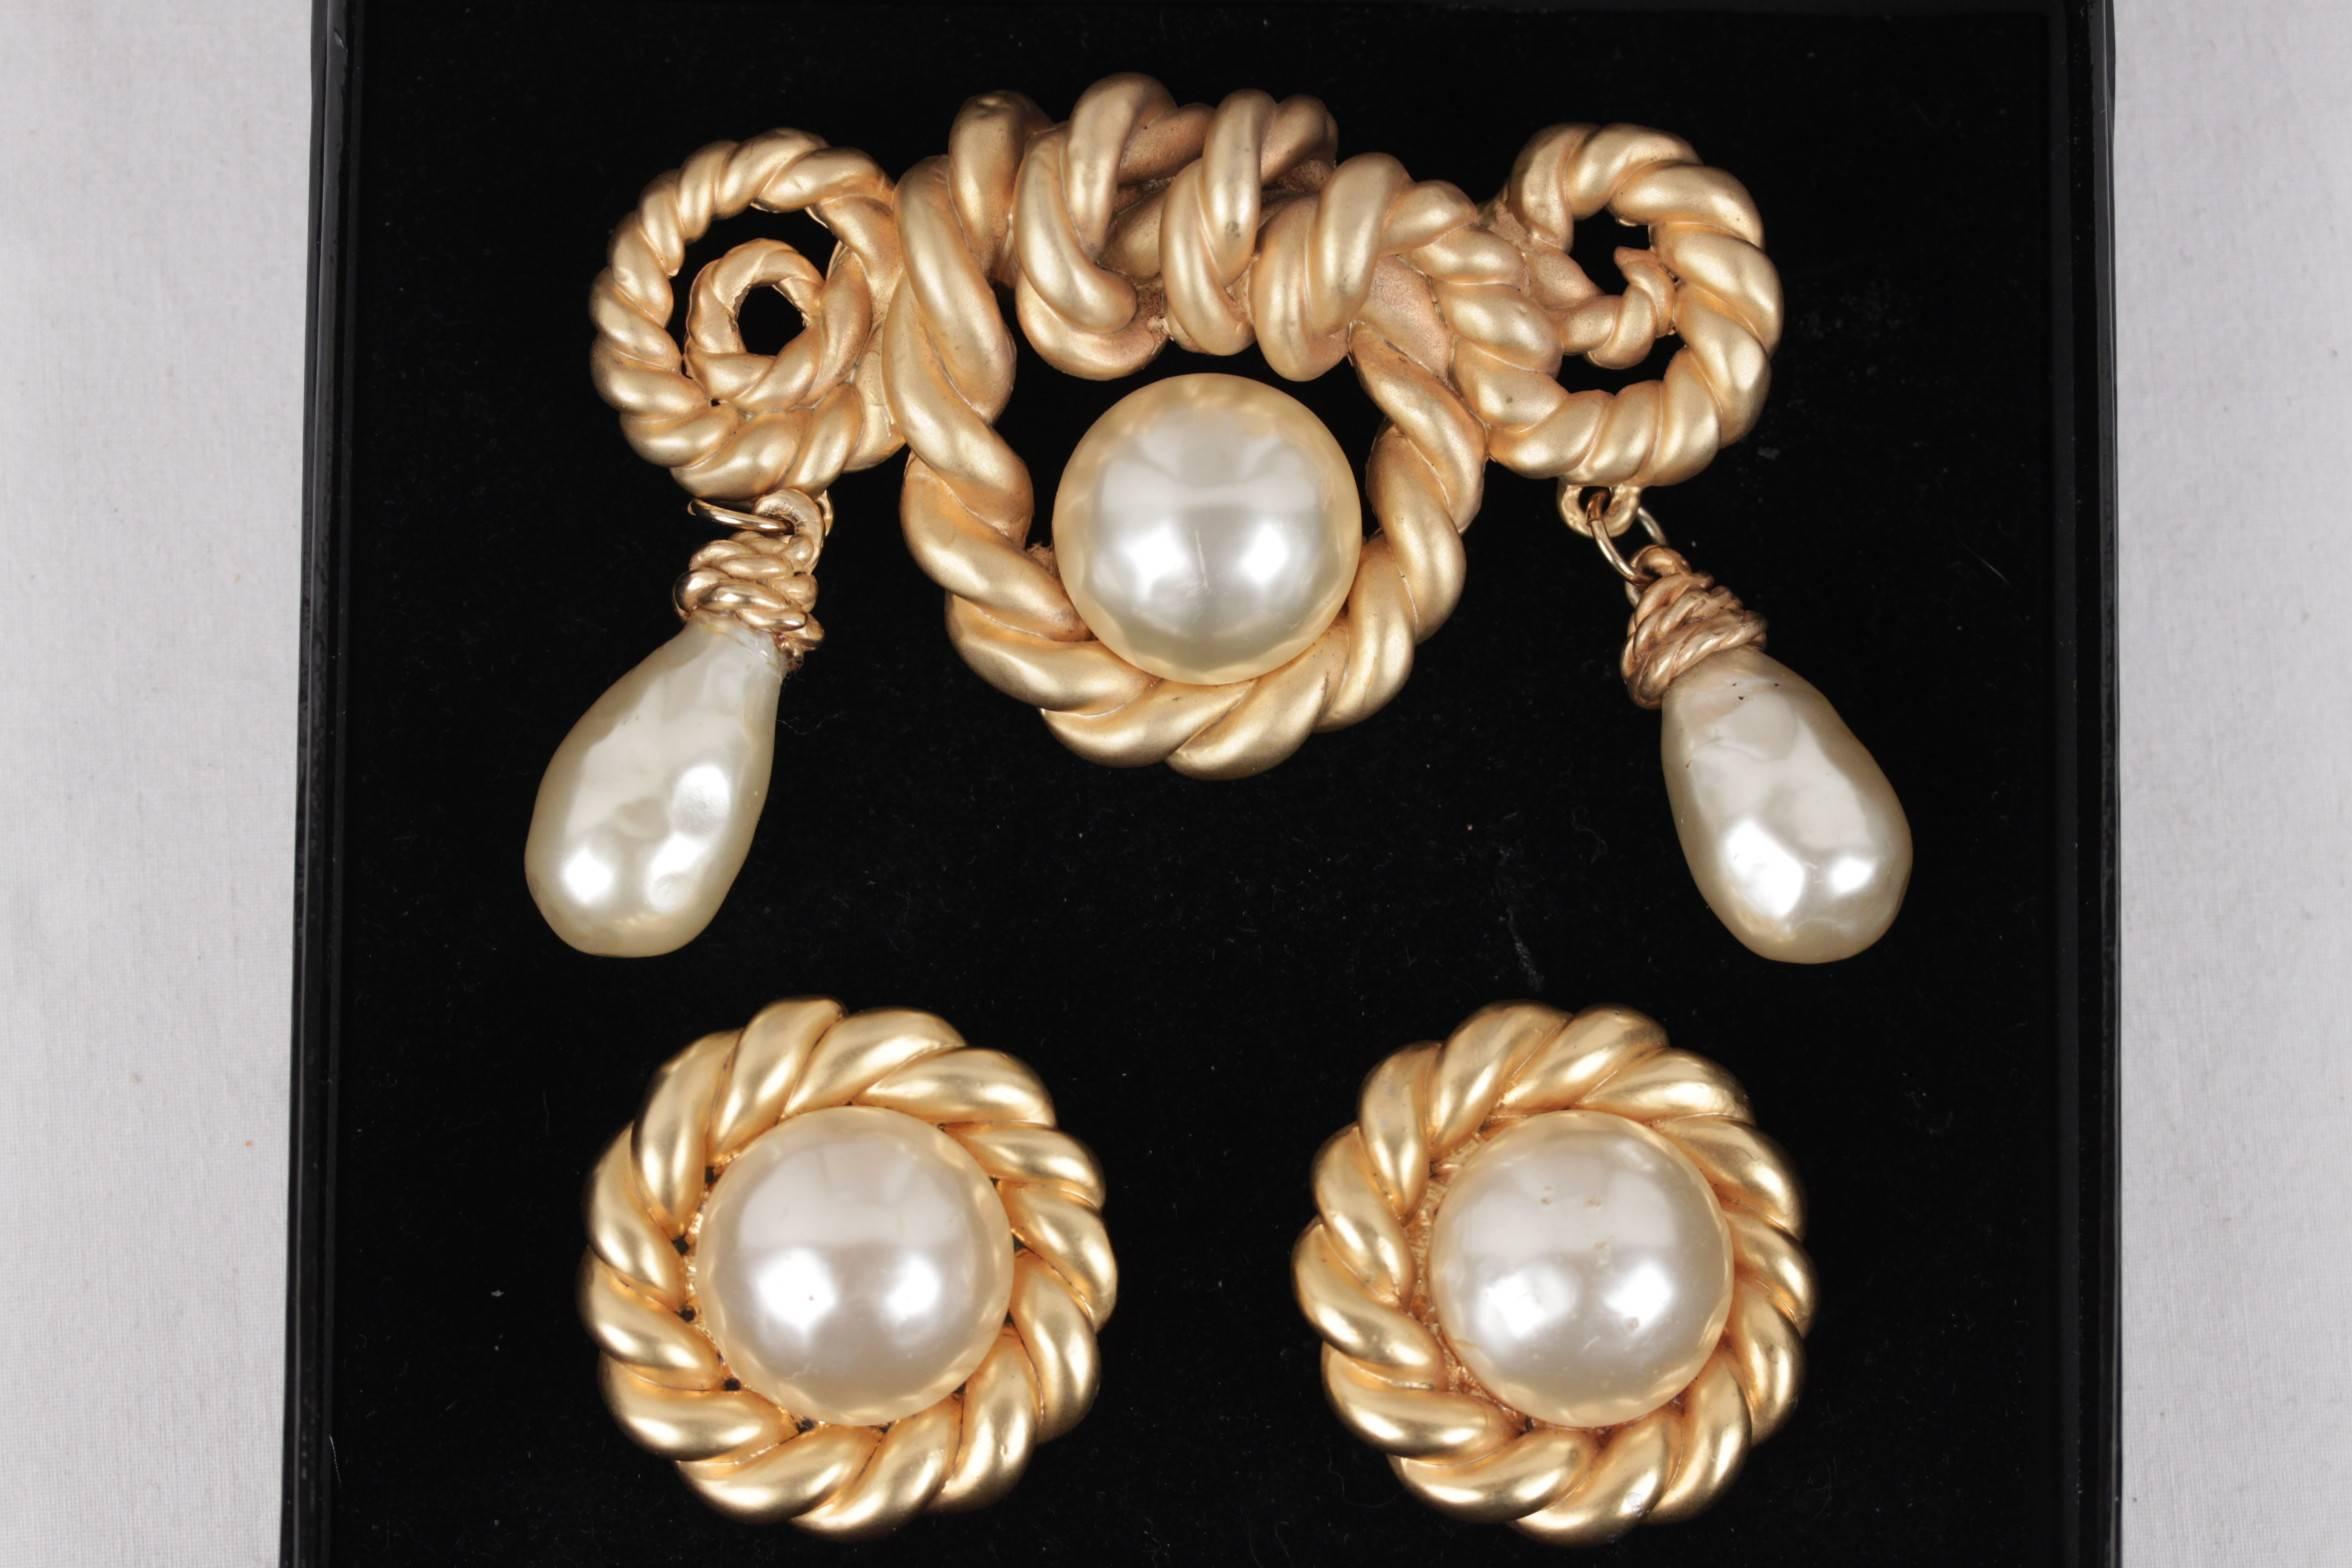  Gorgeous CHANEL twisted rope brooch and earrings set. Brooch is finished in a golden mounting with mat finish, with 2 dangling faux pearl drop and 1 round faux pearl cabochon. Safety pin closure on the back. The pin is matched with splendid clip on